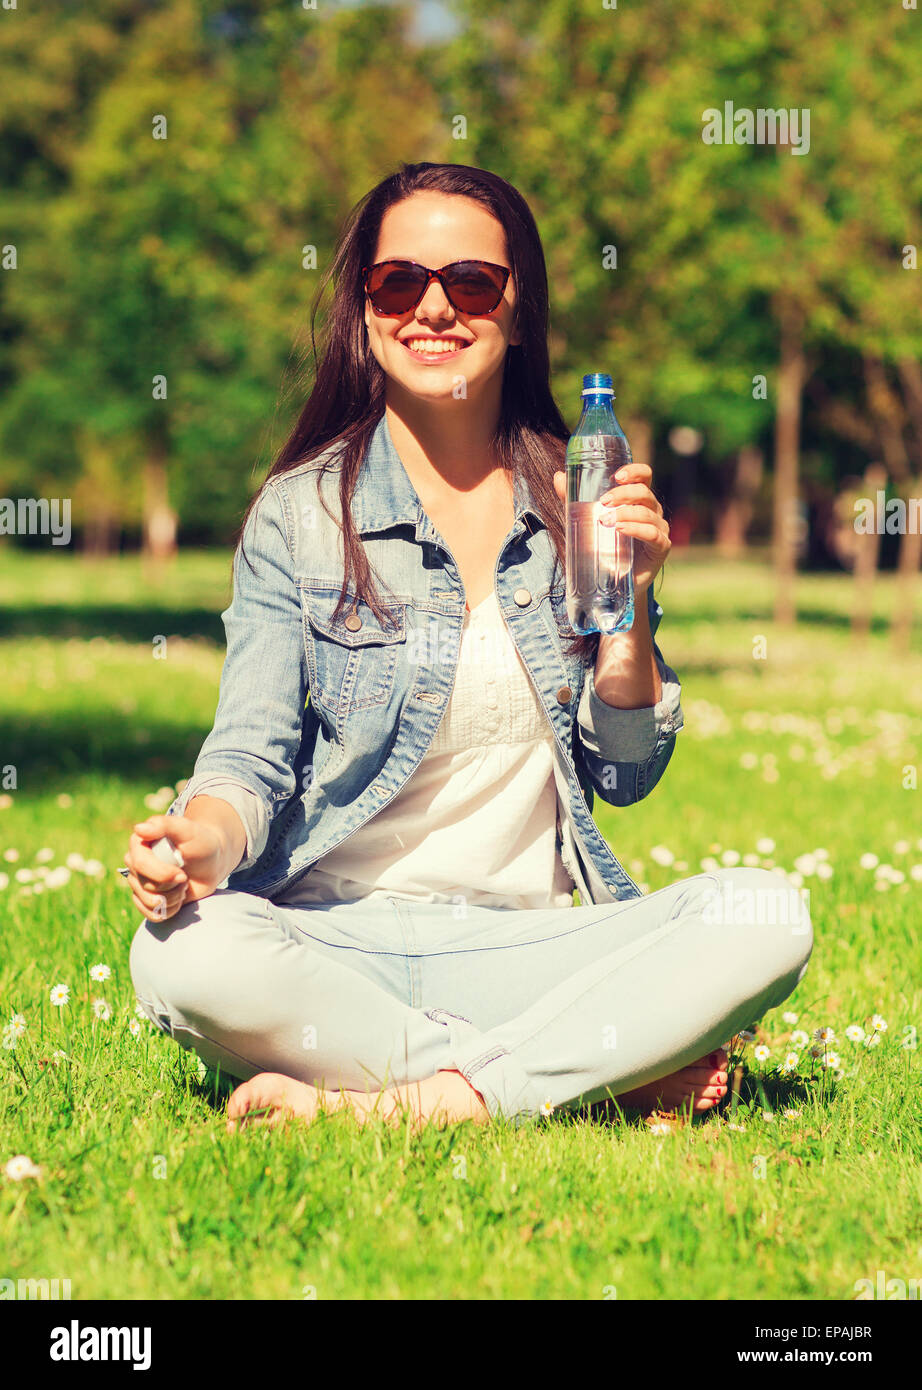 Teen girl drinking water from bottle in summer park. Drinking water in the  heat concept. Close-up Stock Video Footage by ©lizaelesina #489034632